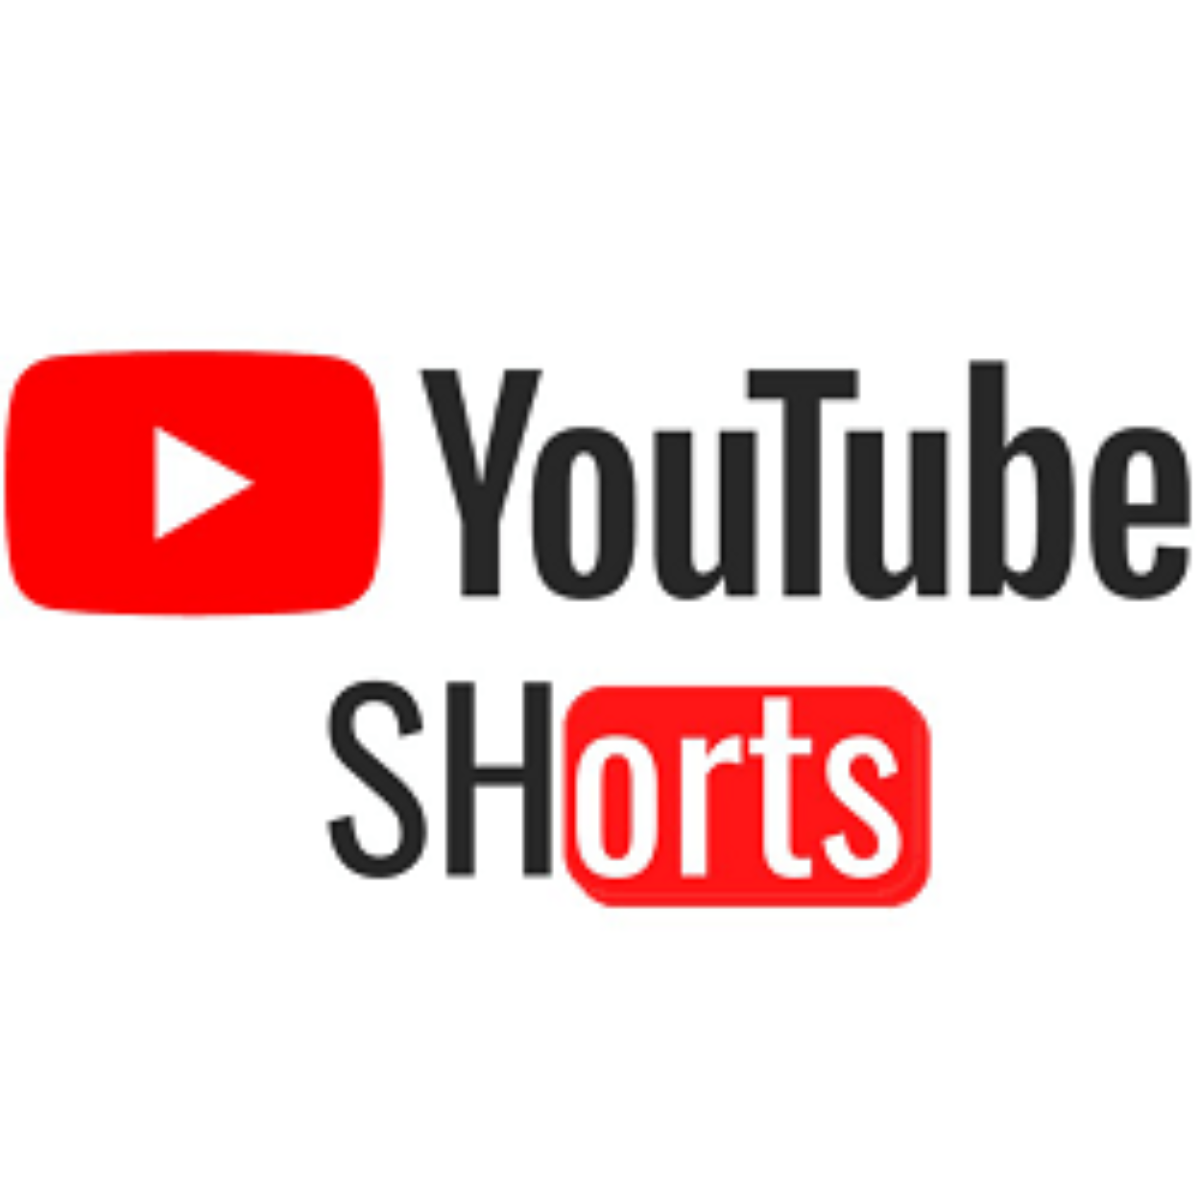 Youtube Shorts Apk Download Free For Android New Update